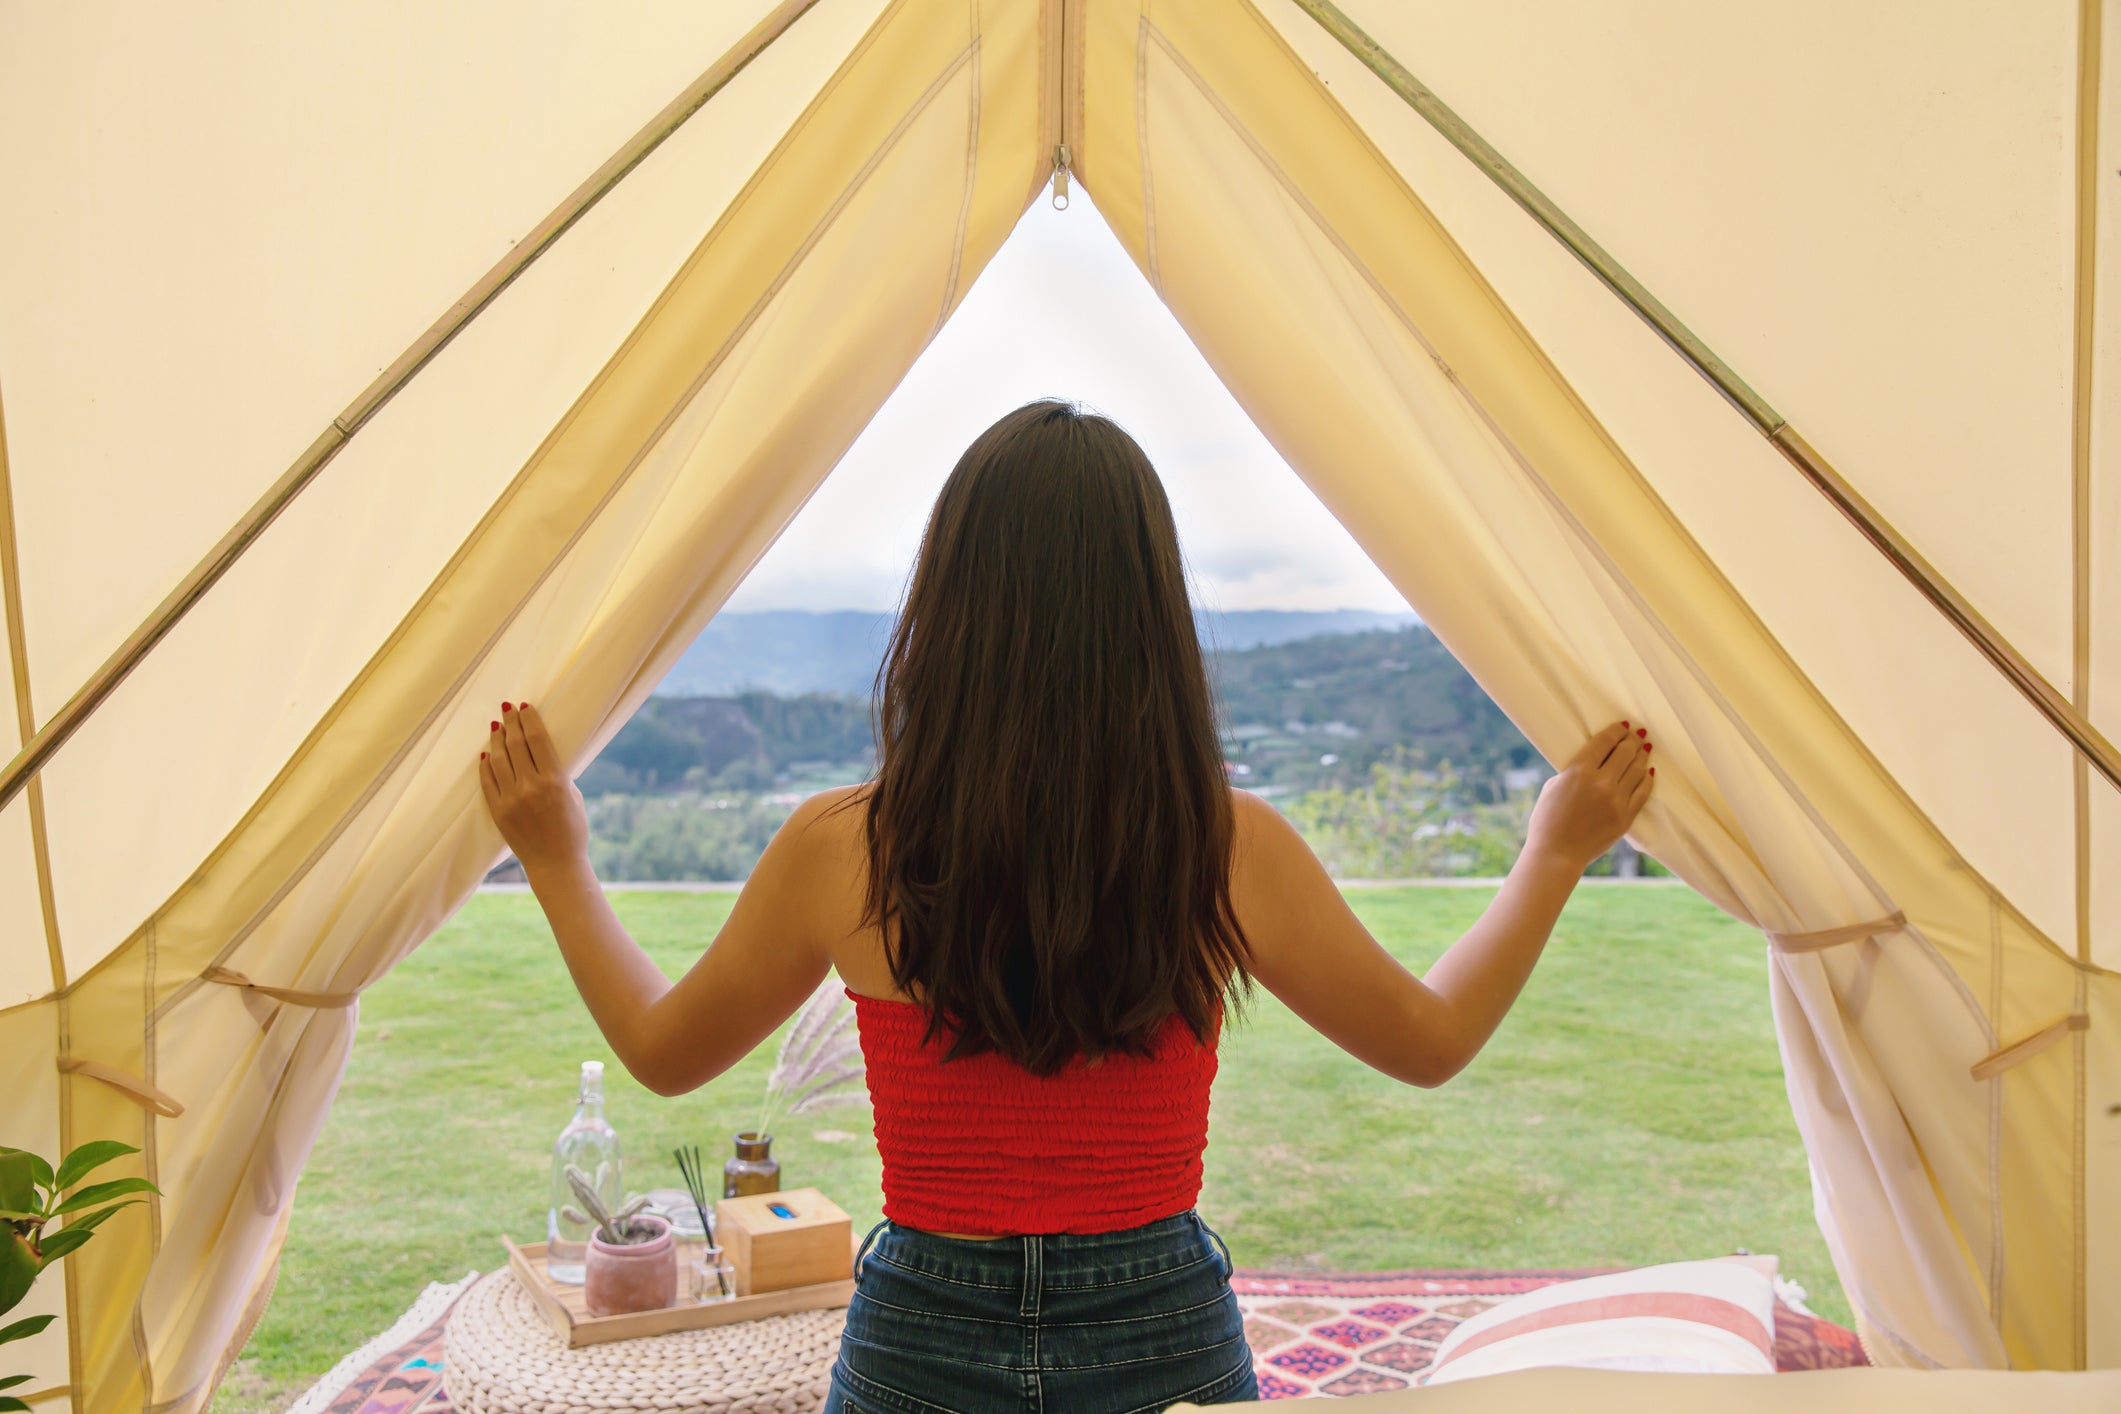 The Best Glamping Accessories and Destinations for Your Next Outdoor Adventure